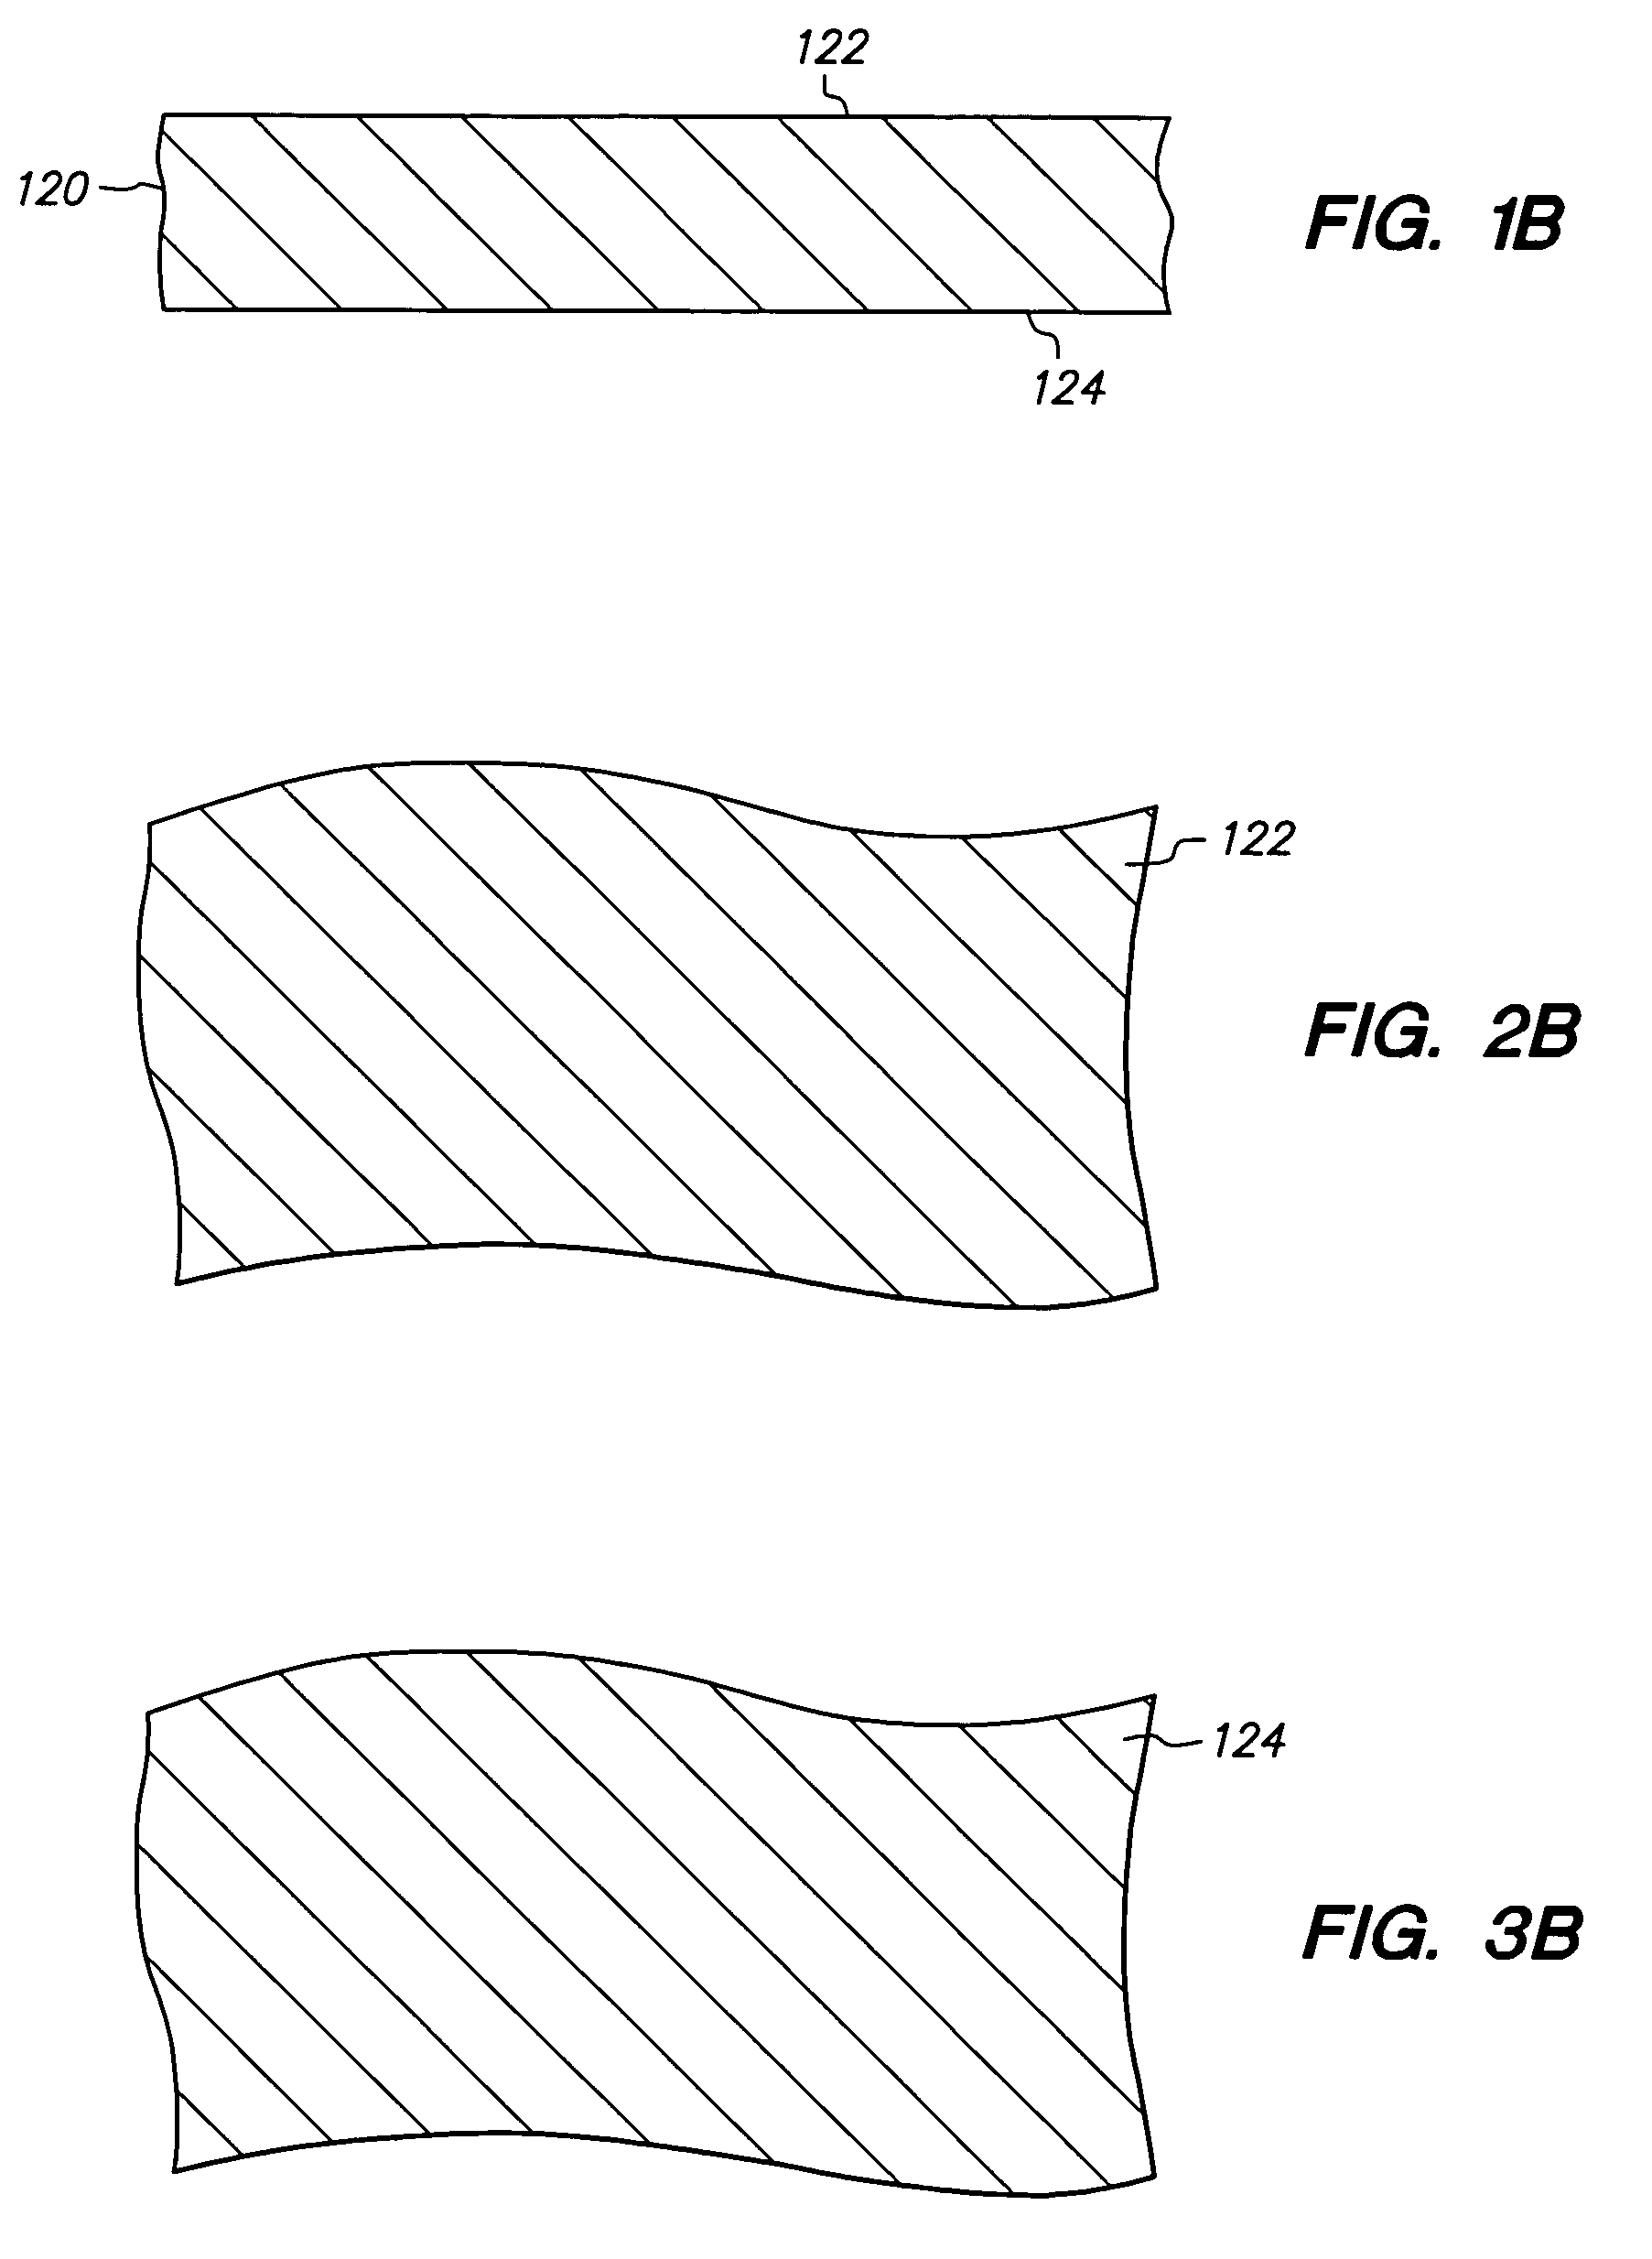 Method of connecting a conductive trace to a semiconductor chip using conductive adhesive